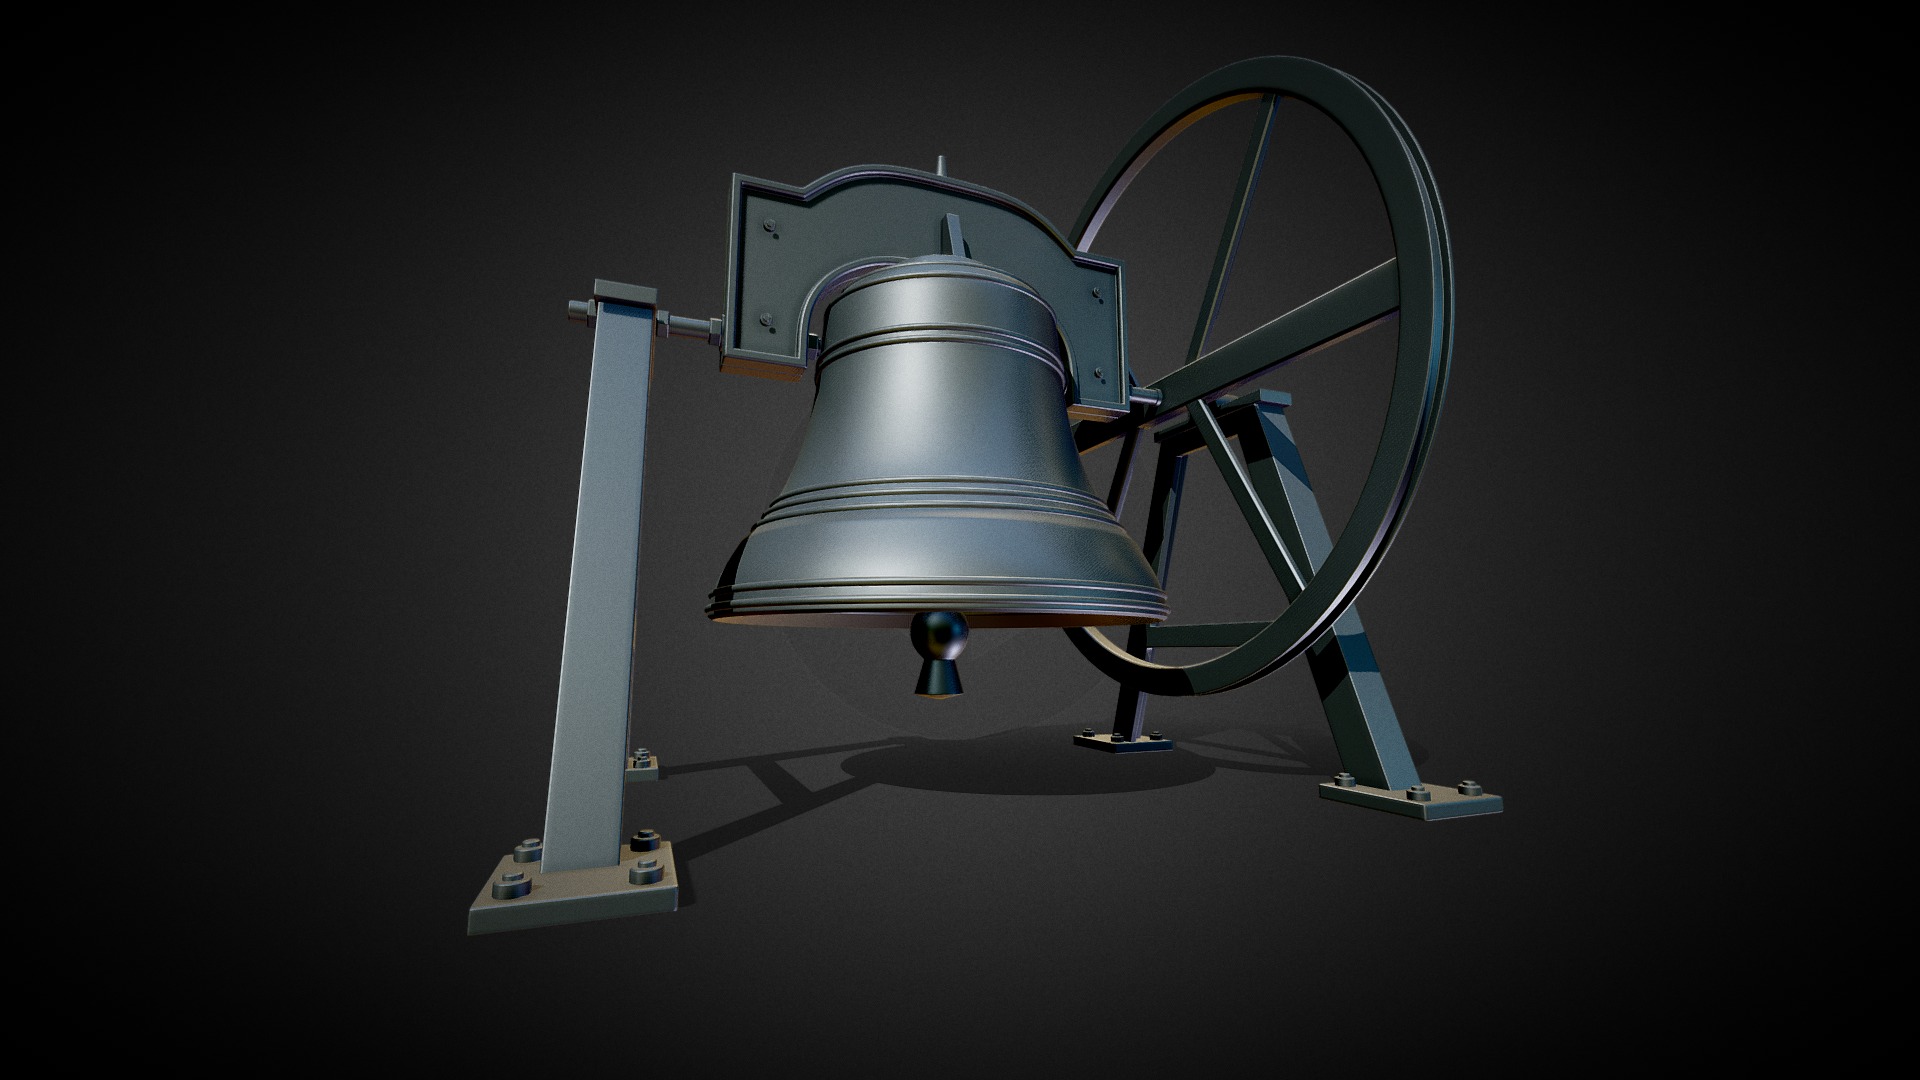 3D model 3D Mission Church Bell – High Poly - This is a 3D model of the 3D Mission Church Bell - High Poly. The 3D model is about a metal object with a wire attached.